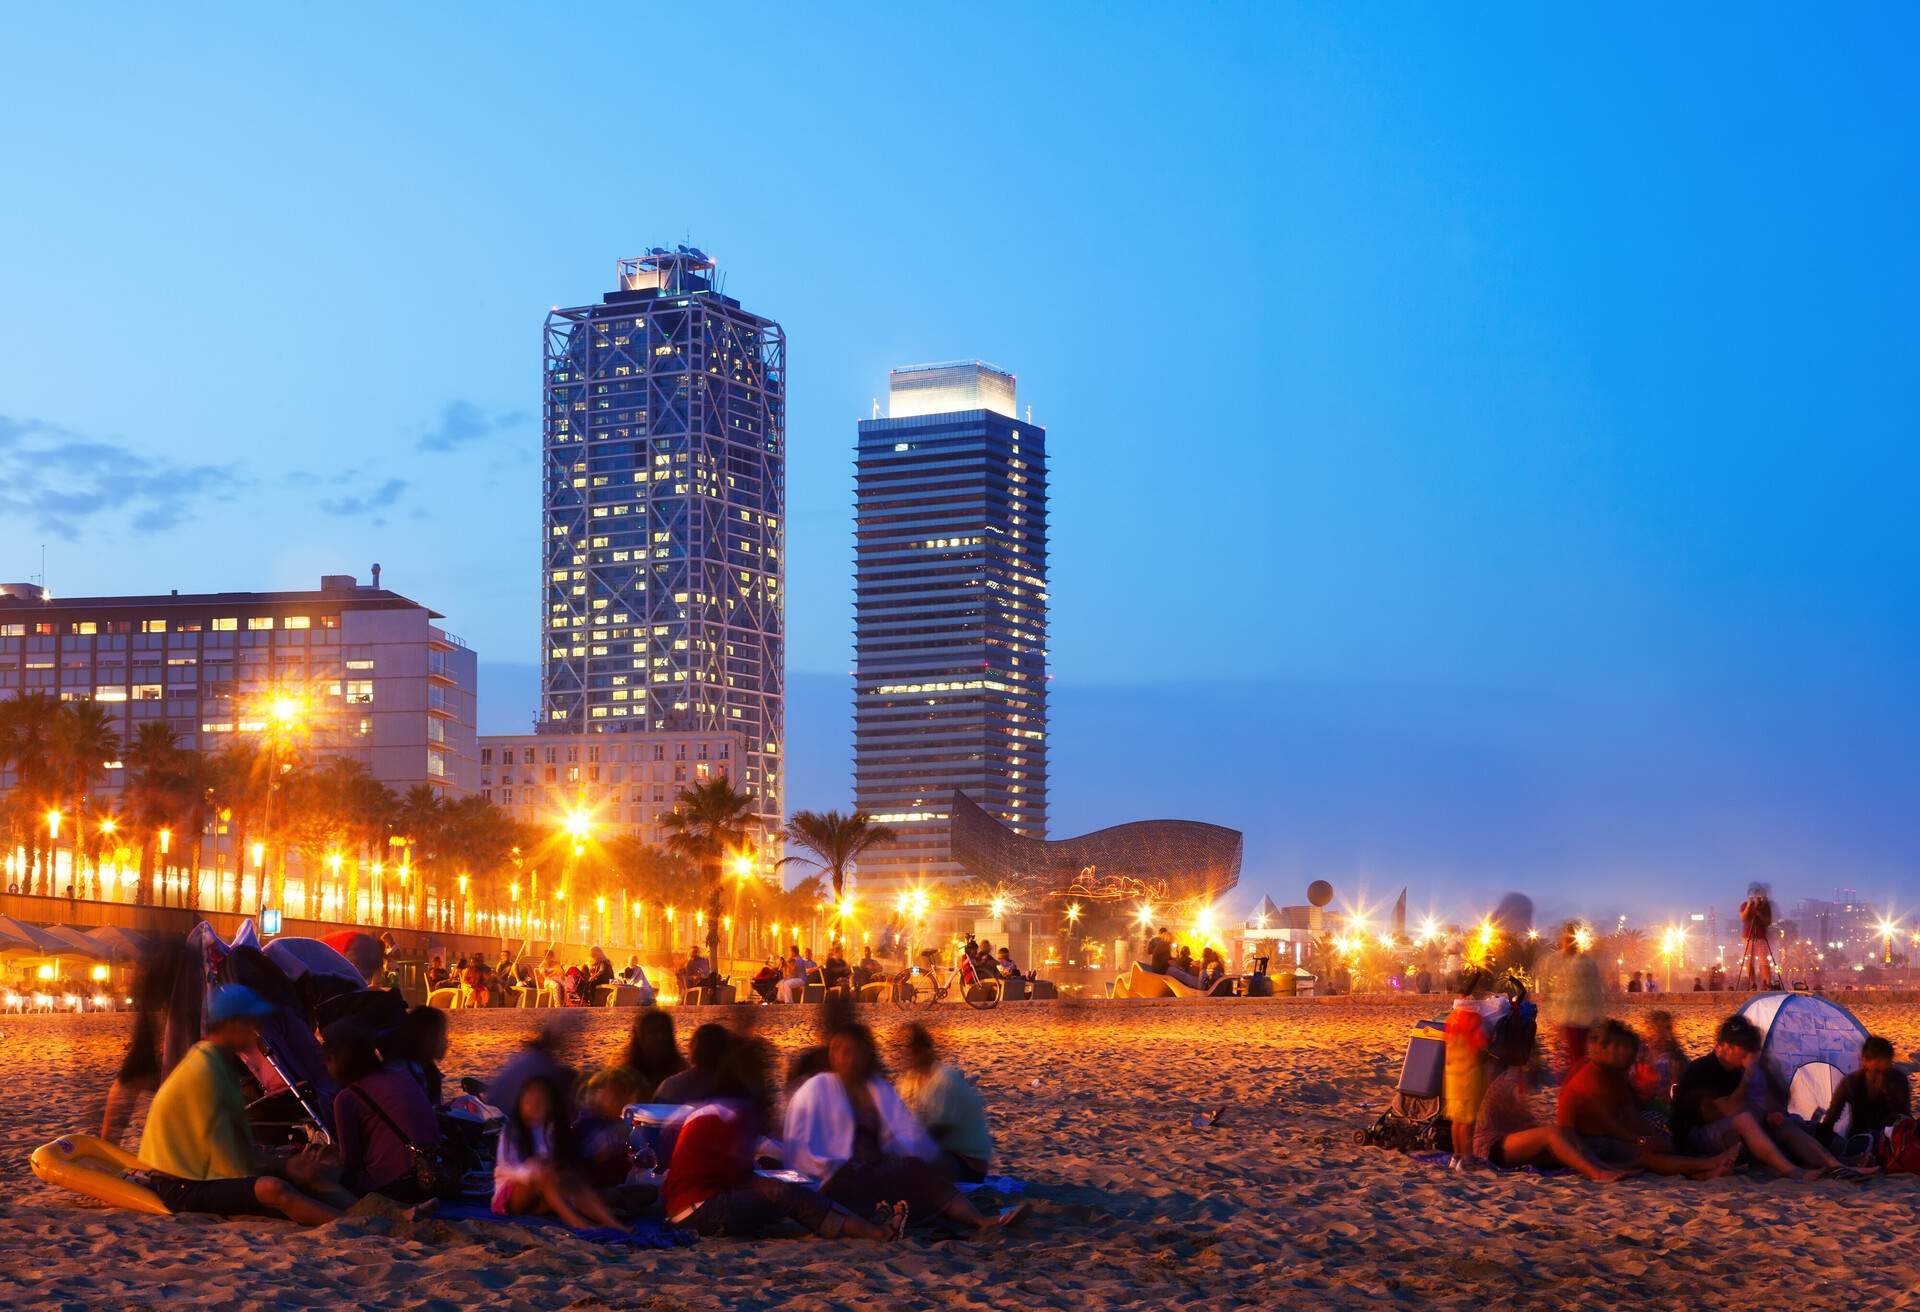 People gather on a beach lined with city lights, with views of two skyscrapers in the background.